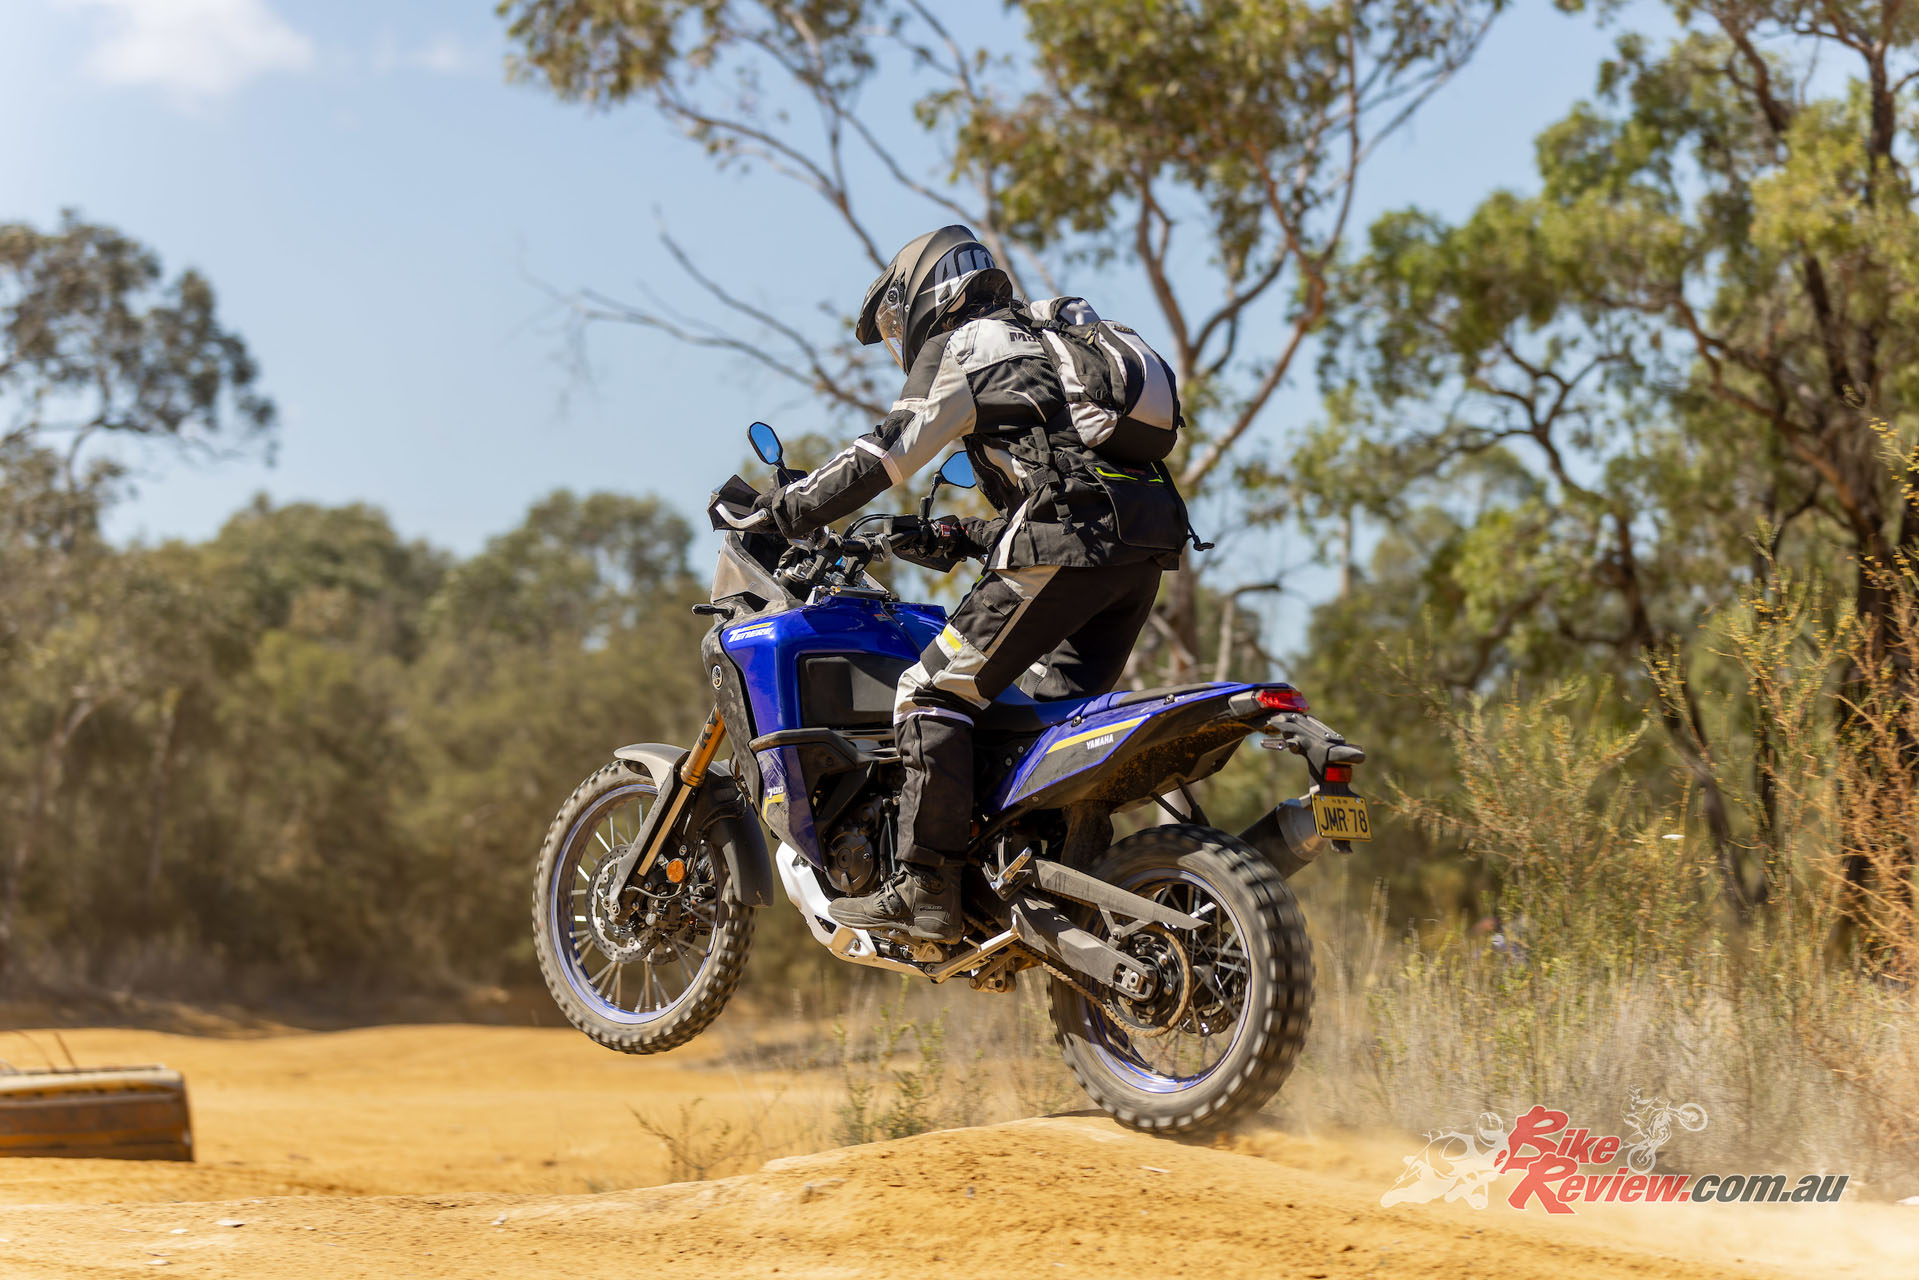 The 2023 Yamaha Tenere 700 World Raid launch was certainly the most difficult riding of the year...